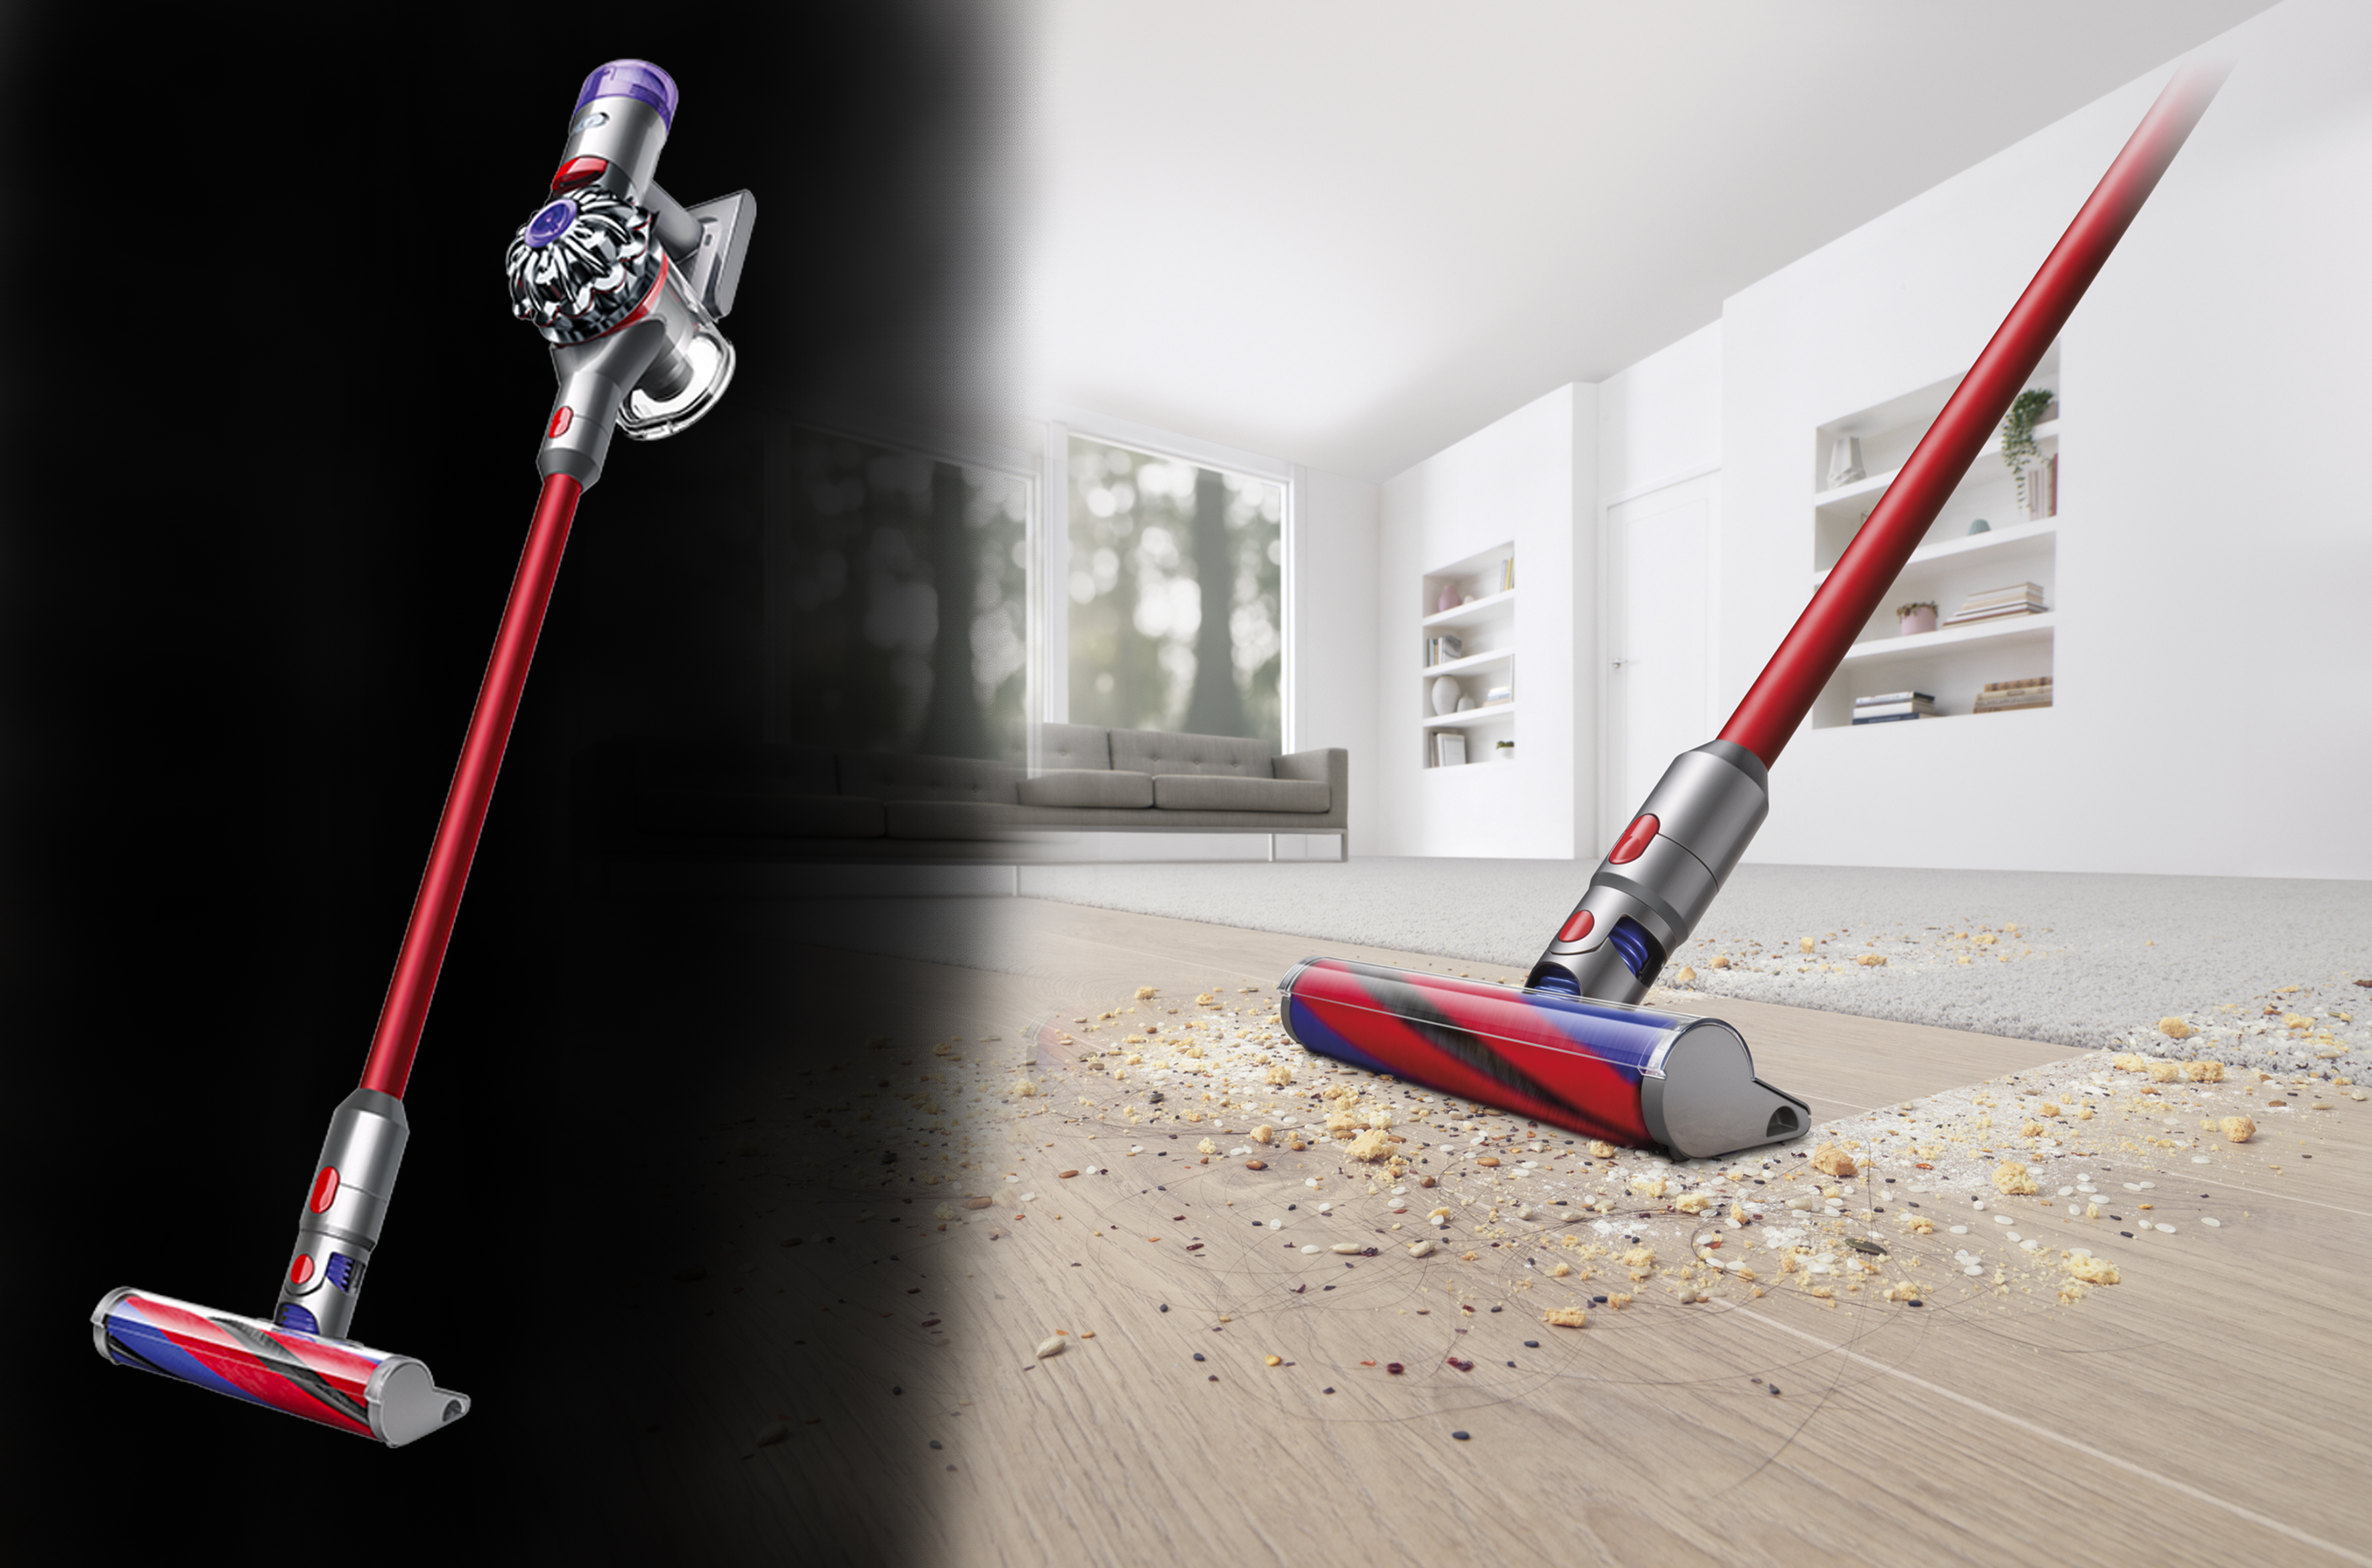 REVIEW: WHAT IS DYSON V8 SLIM FLUFFY+ AND WHY IS IT WORTH 